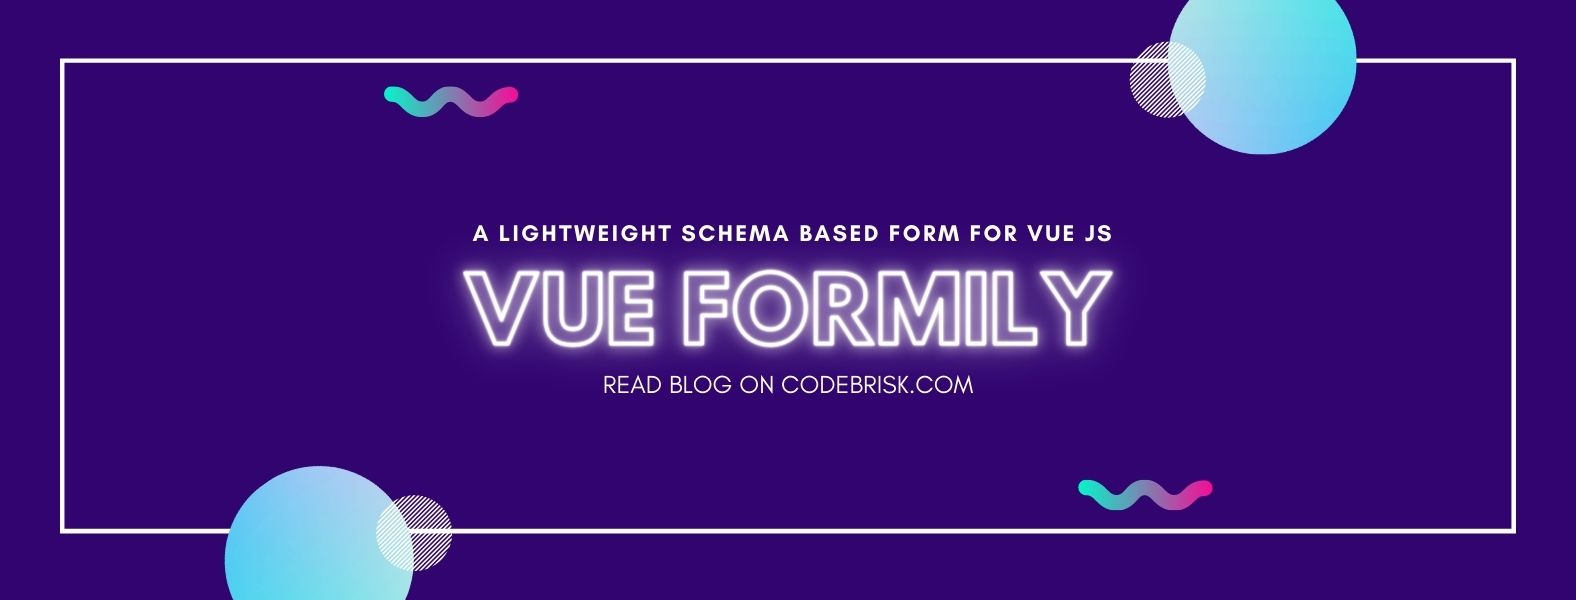 Vue-formily - A lightweight schema-based form for Vue js cover image